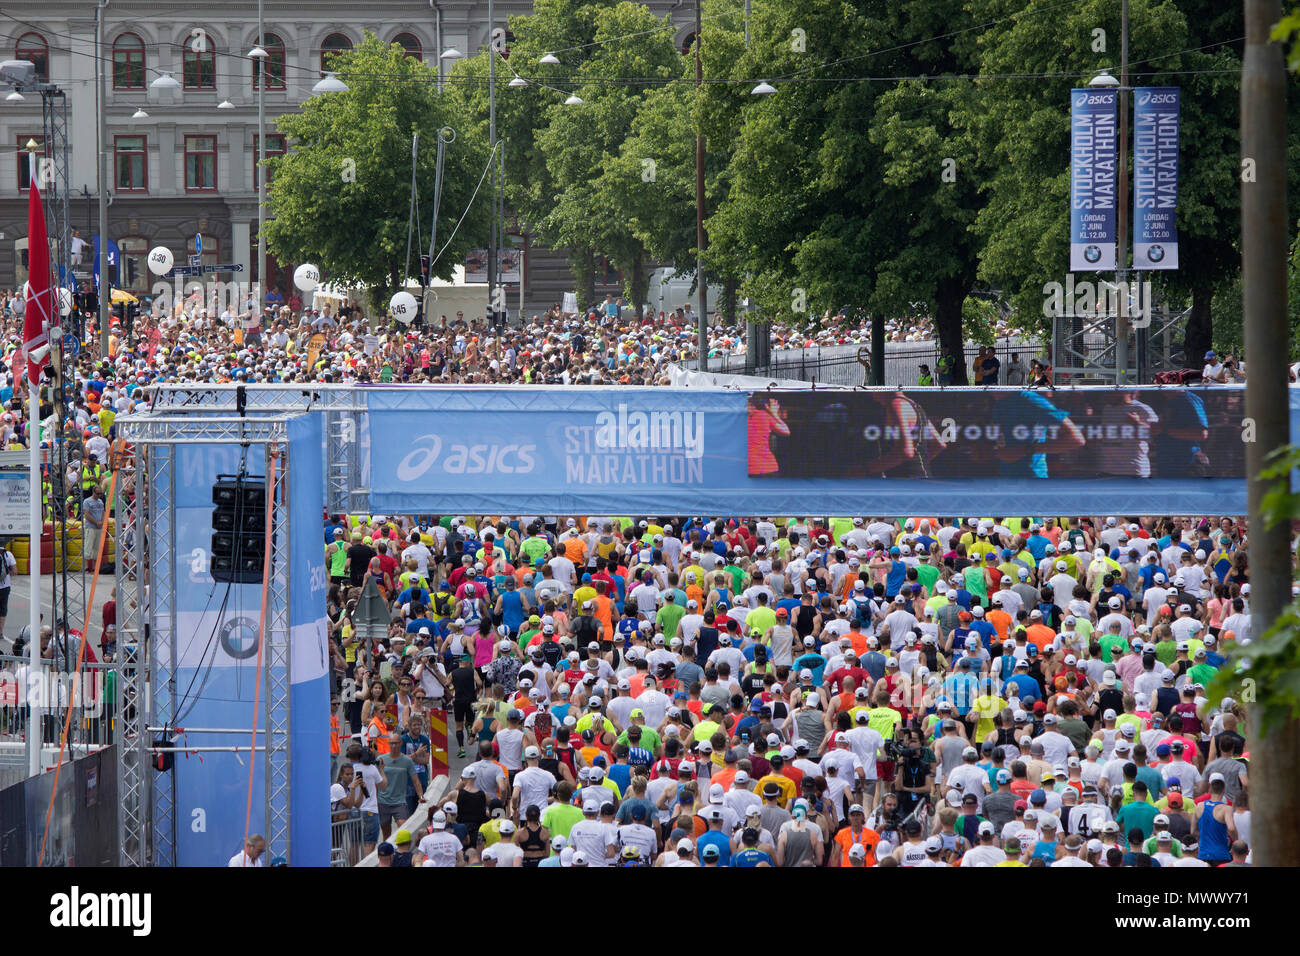 ASICS Stockholm (STHLM) Marathon 2018. Thousands of runners at Stadion  area, leave starting point, heading to Valhallavägen street to continue  their race course. Stockholm, Sweden. 2nd June 2018. Credit: BasilT/Alamy  Live News